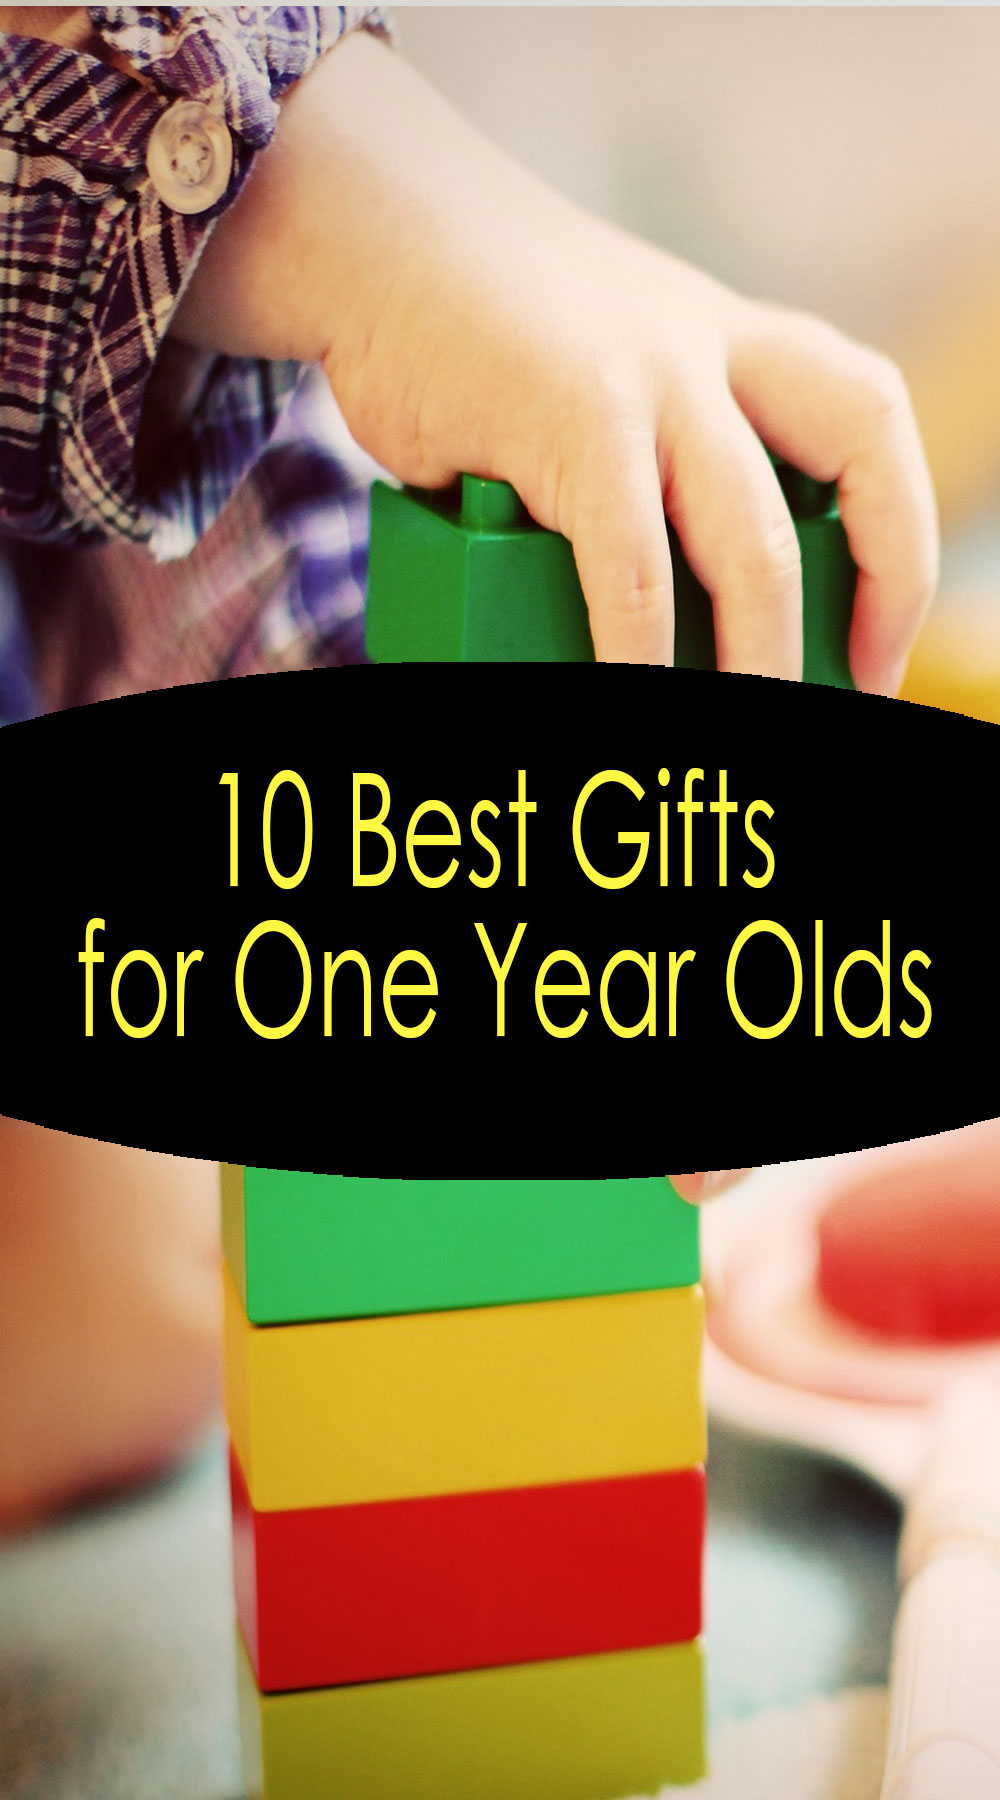 10 Best Gifts for One Year Olds